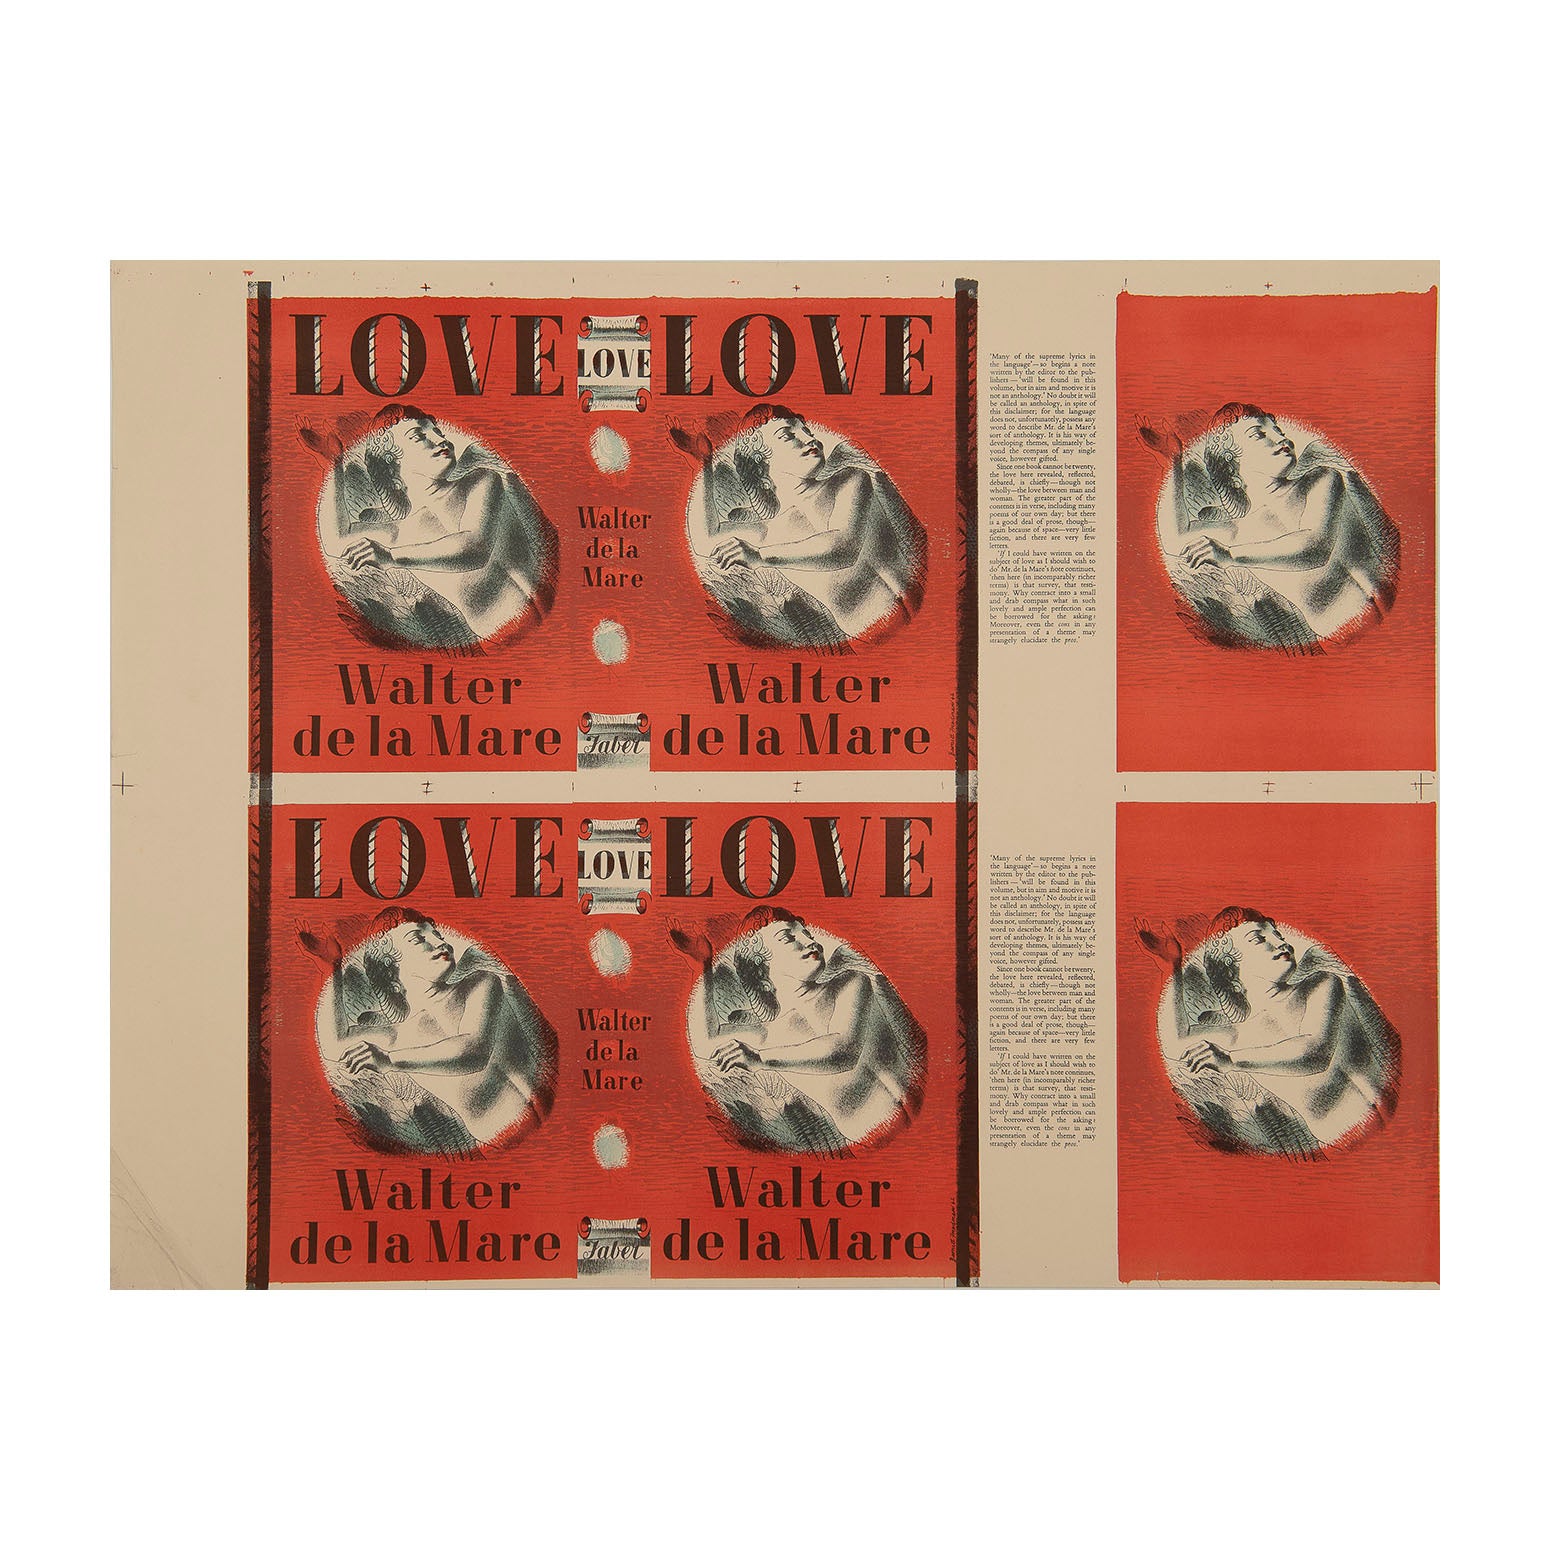 proof dustjacket, Love, Walter de la Mare, designed by Barnet Freedman and printed by the Curwen Press for Faber & Faber, 1943. Love is a collection of verse and prose by the English poet Walter de la Mare (1873–1956). The cover design (dated 1942) depicts a winged cherub against a red background.